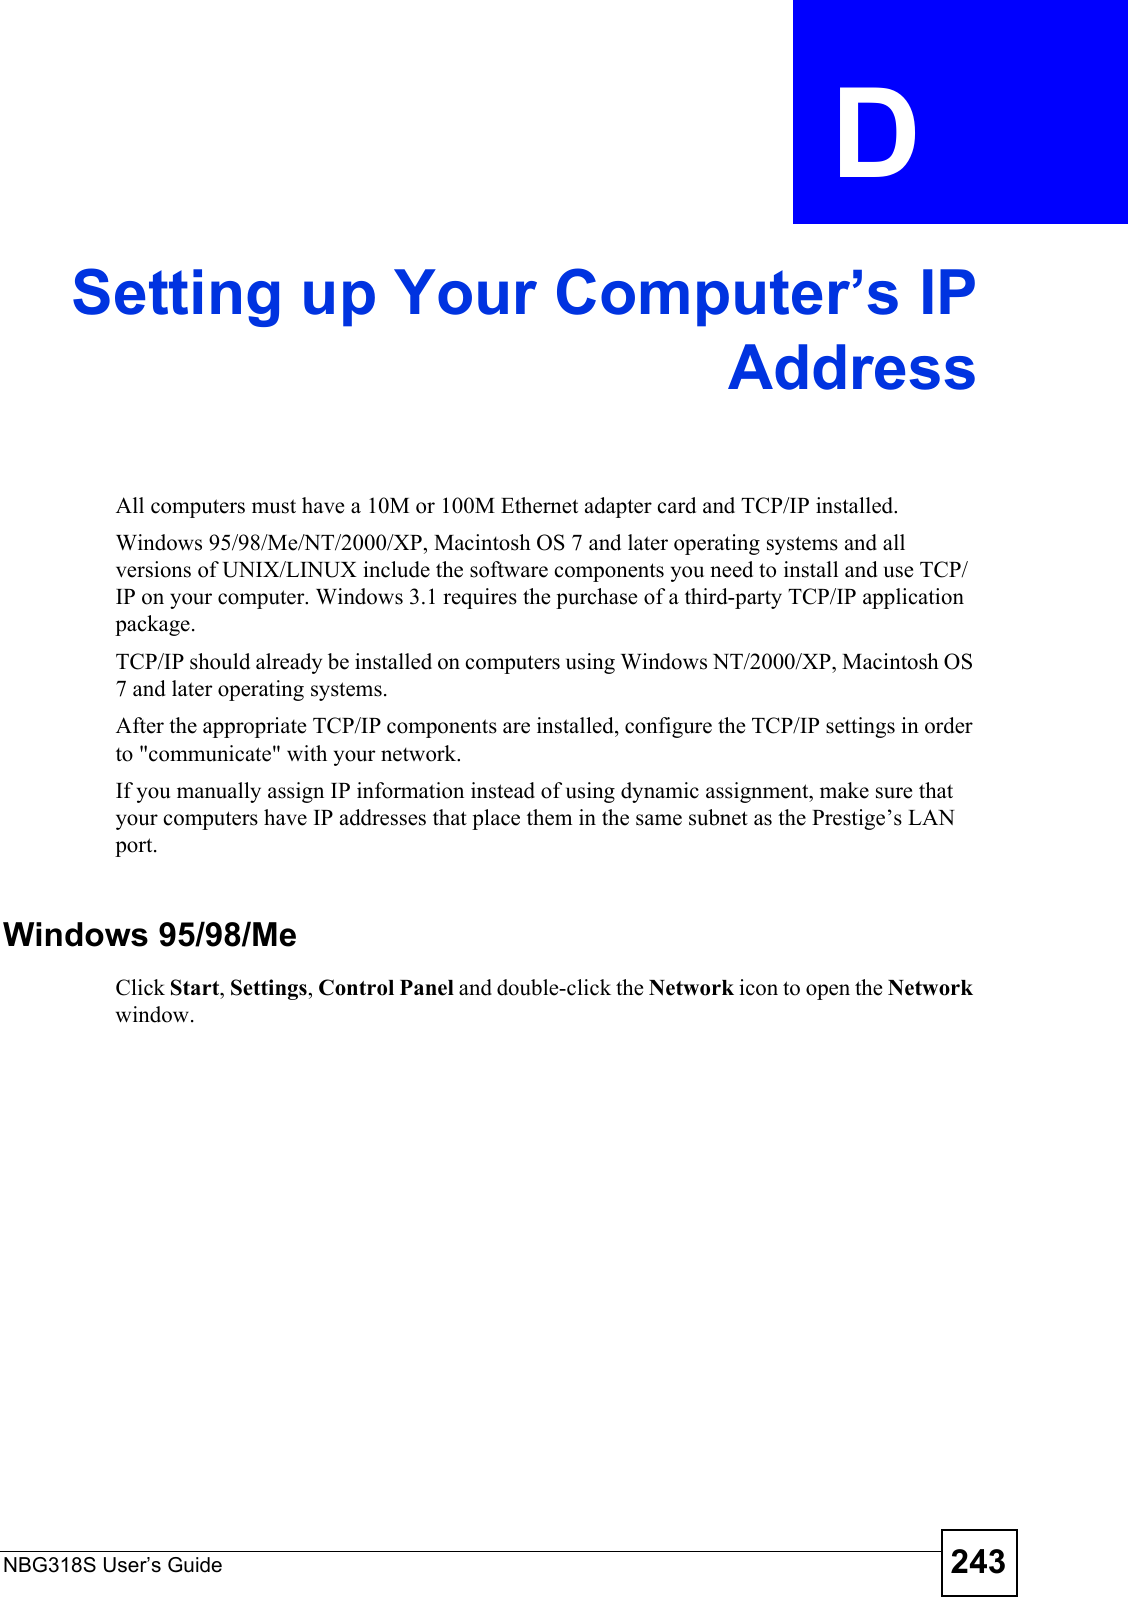 NBG318S User’s Guide 243APPENDIX  D Setting up Your Computer’s IPAddressAll computers must have a 10M or 100M Ethernet adapter card and TCP/IP installed. Windows 95/98/Me/NT/2000/XP, Macintosh OS 7 and later operating systems and all versions of UNIX/LINUX include the software components you need to install and use TCP/IP on your computer. Windows 3.1 requires the purchase of a third-party TCP/IP application package.TCP/IP should already be installed on computers using Windows NT/2000/XP, Macintosh OS 7 and later operating systems.After the appropriate TCP/IP components are installed, configure the TCP/IP settings in order to &quot;communicate&quot; with your network. If you manually assign IP information instead of using dynamic assignment, make sure that your computers have IP addresses that place them in the same subnet as the Prestige’s LAN port.Windows 95/98/MeClick Start, Settings, Control Panel and double-click the Network icon to open the Network window.